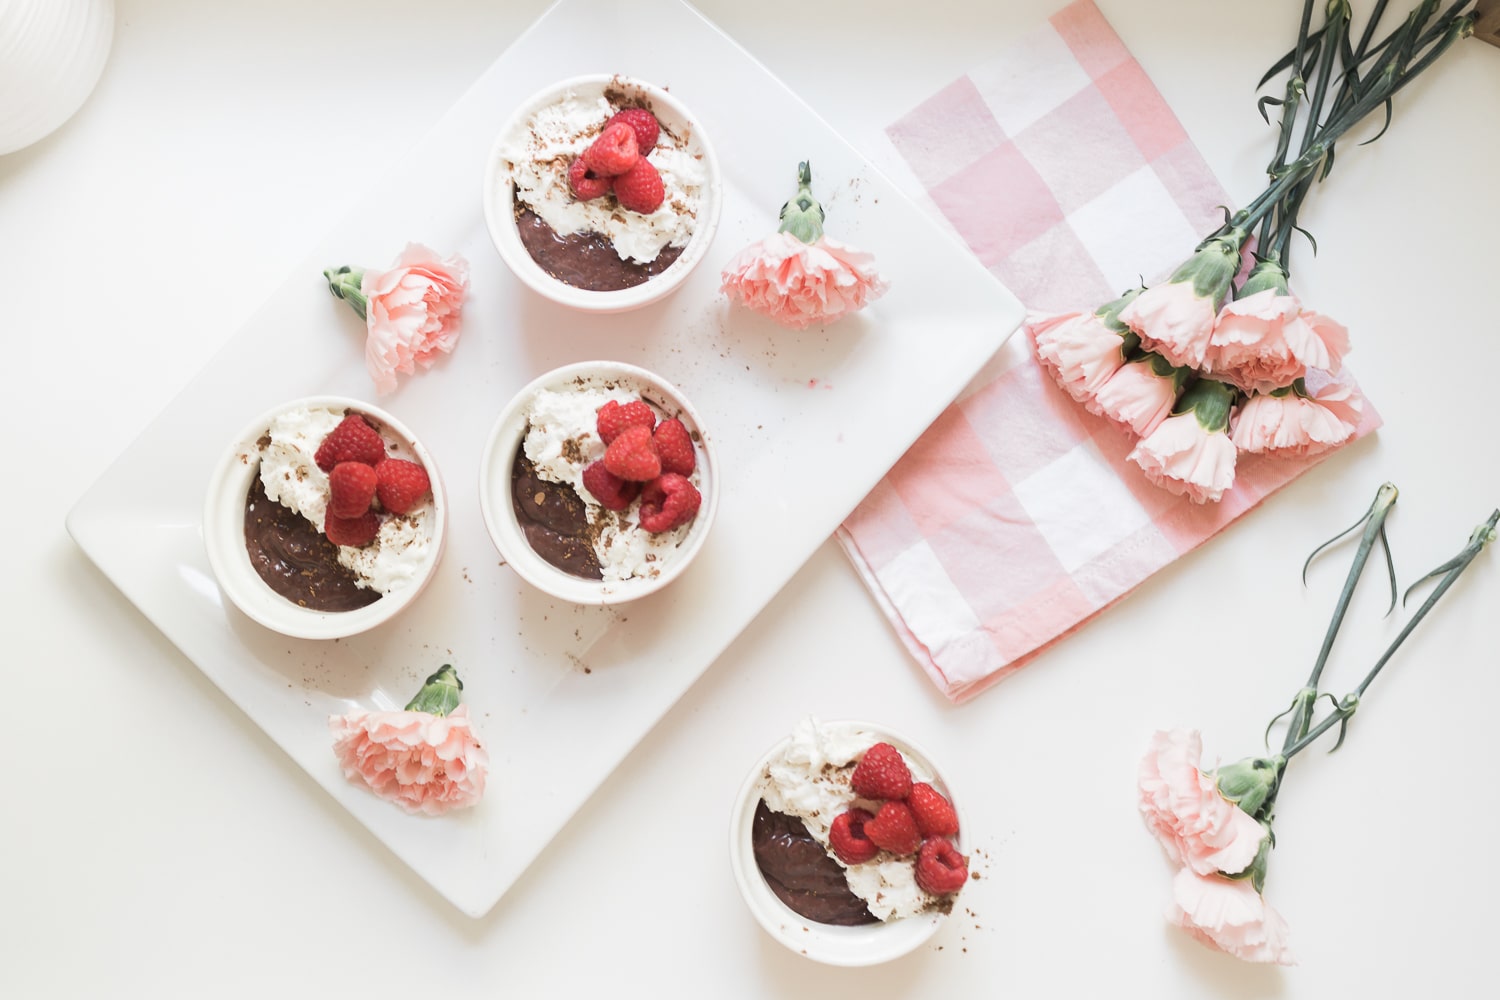 Healthy chocolate pudding made with chia seeds, date syrup, and cacao powder by blogger Stephanie Ziajka on Diary of a Debutante